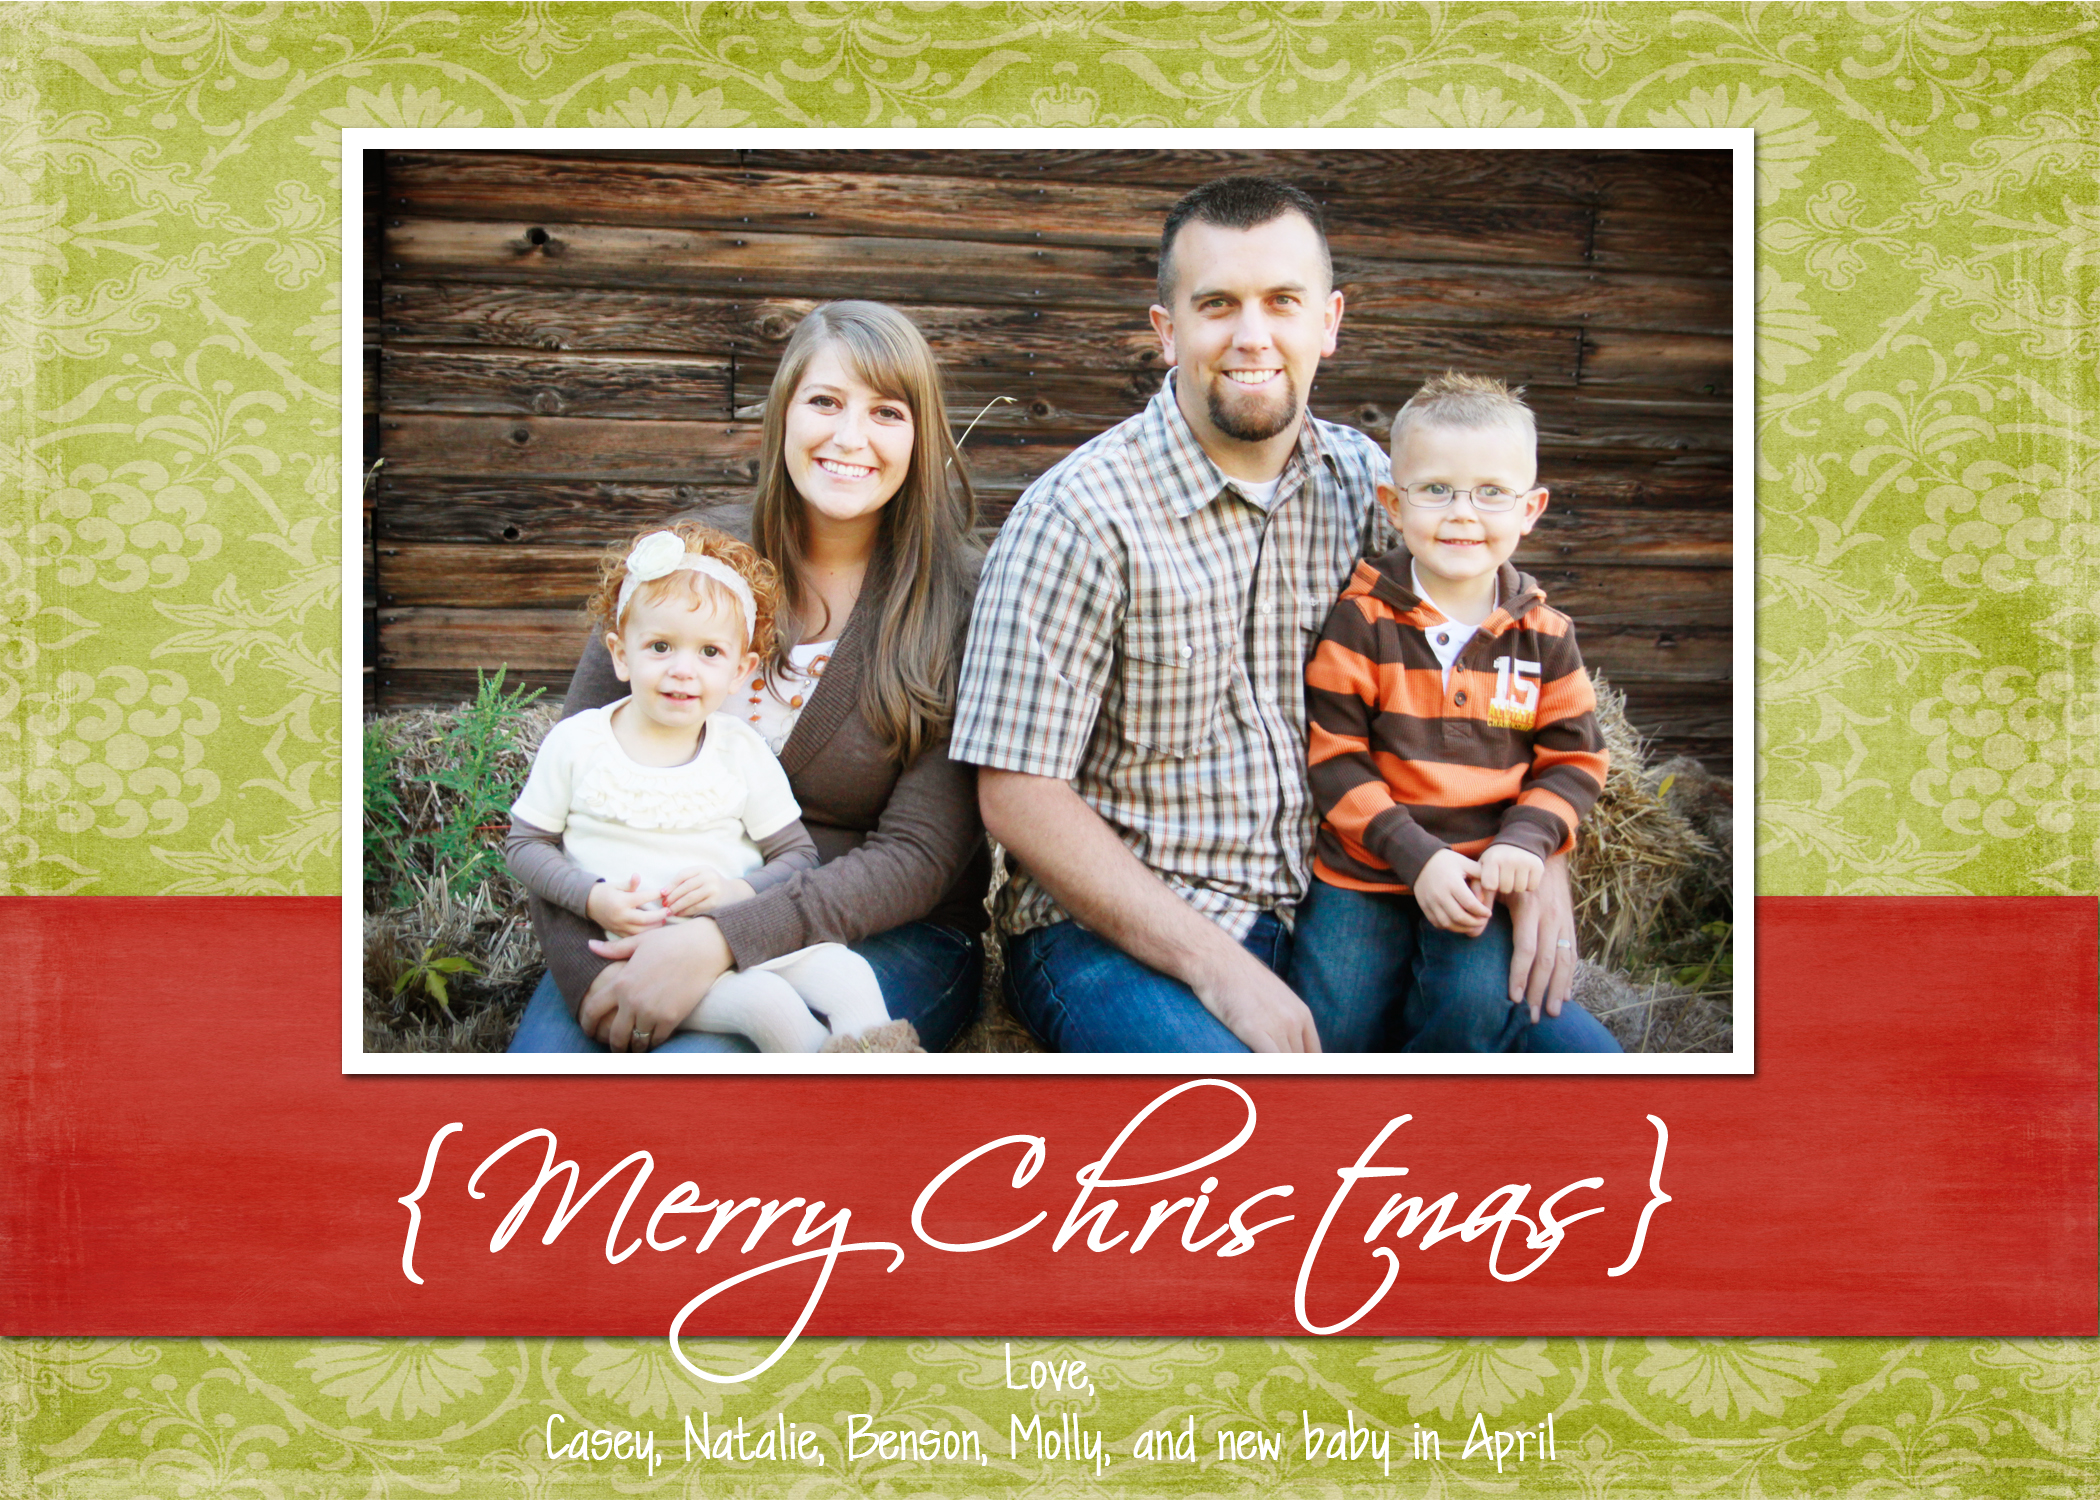 Christmas Card Templates Free Download - The Creative Mom Regarding Free Photoshop Christmas Card Templates For Photographers